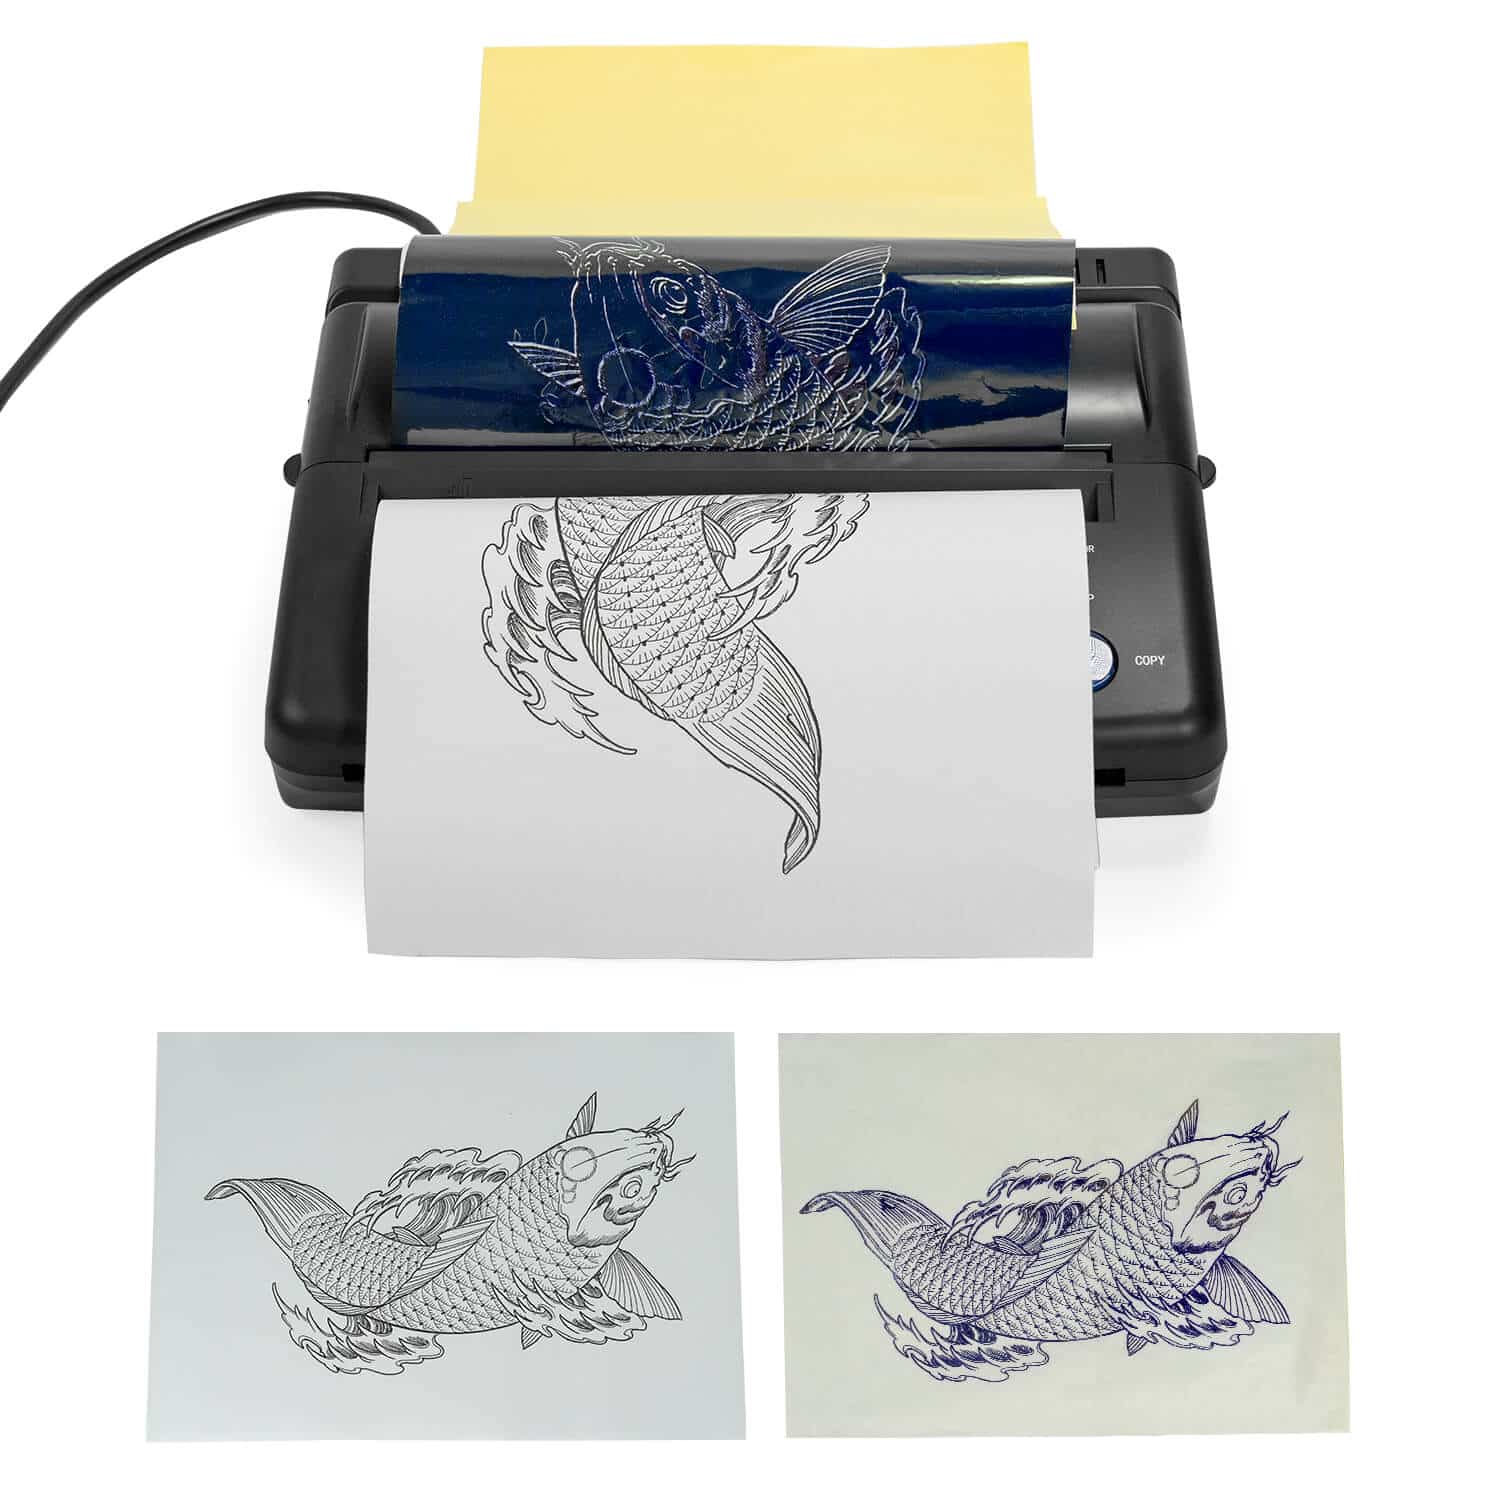 How to use a Thermal Printer for tattoo stencil - YouTube